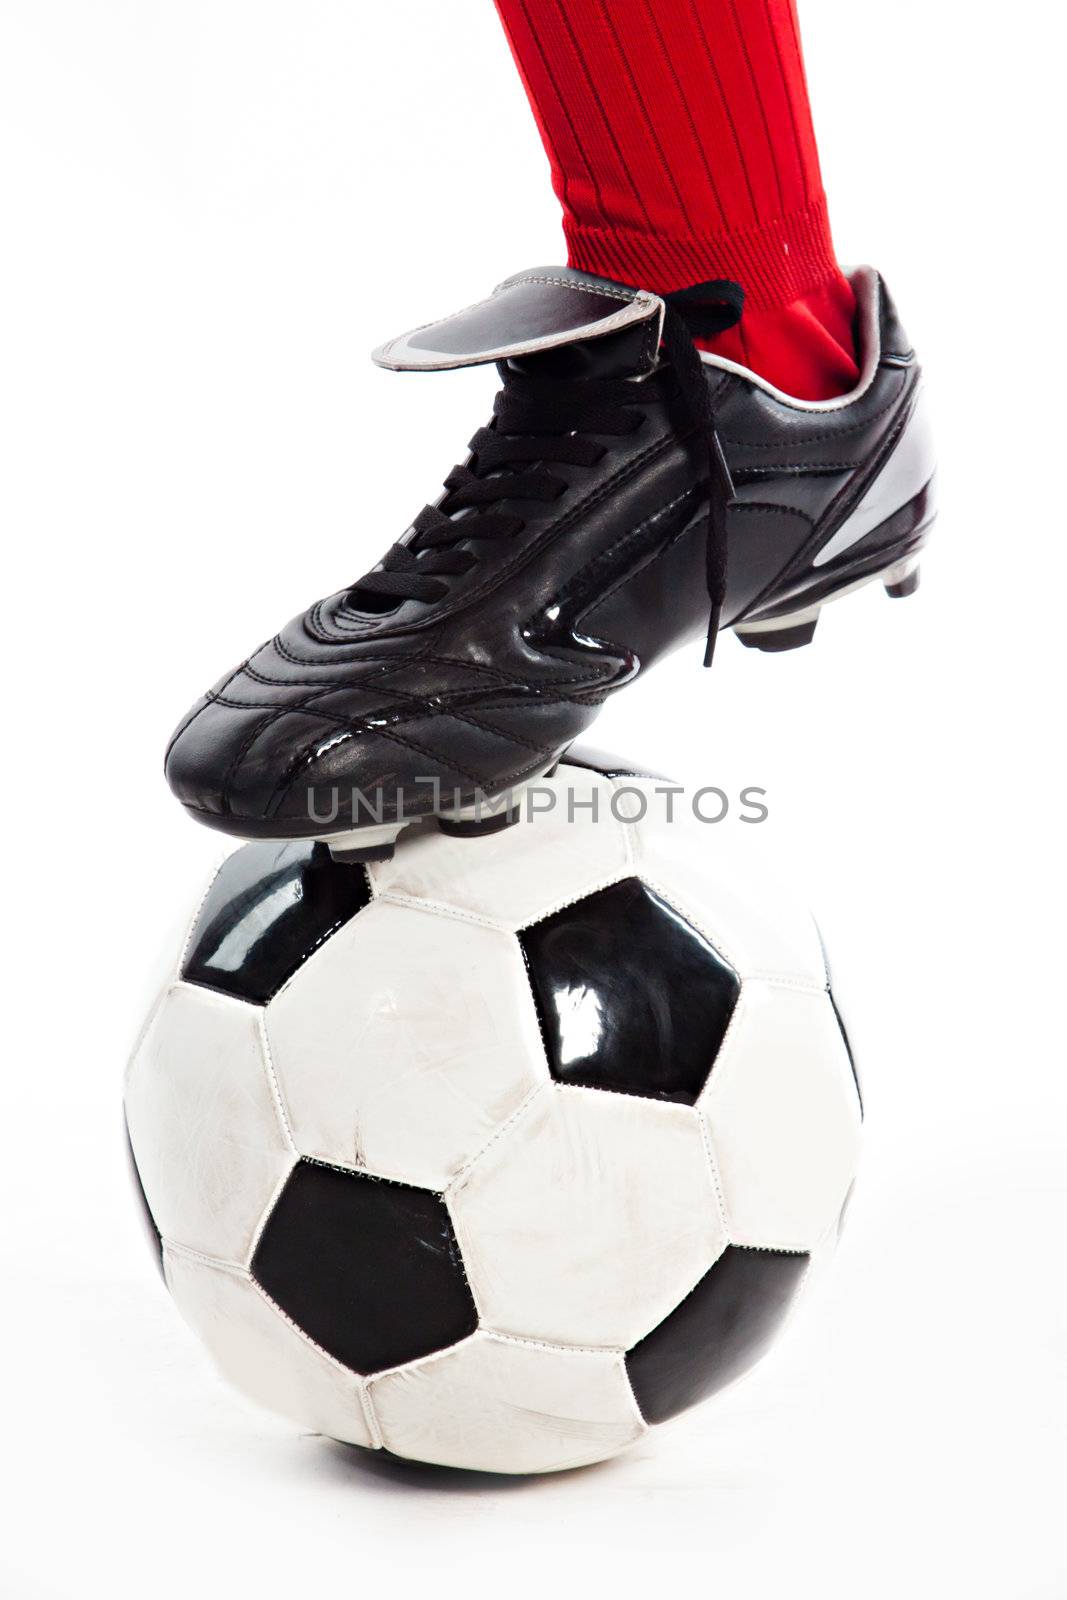 Foot in the red socks, and black shoes standing on a football